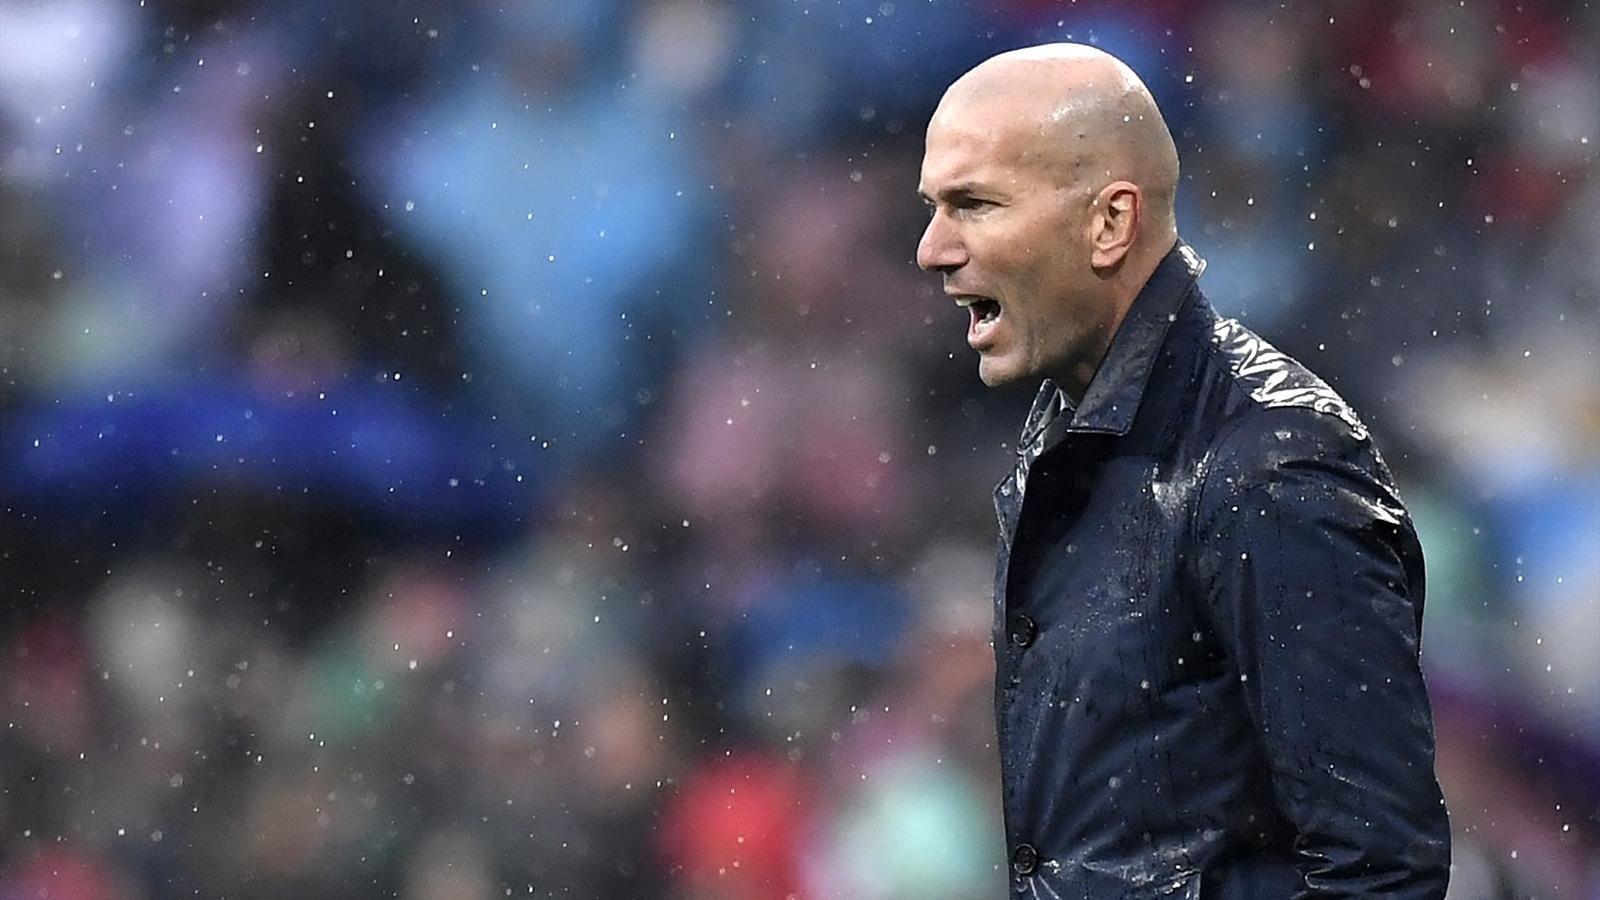 Real Madrid lose at home as pressure on Zinedine Zidane mounts